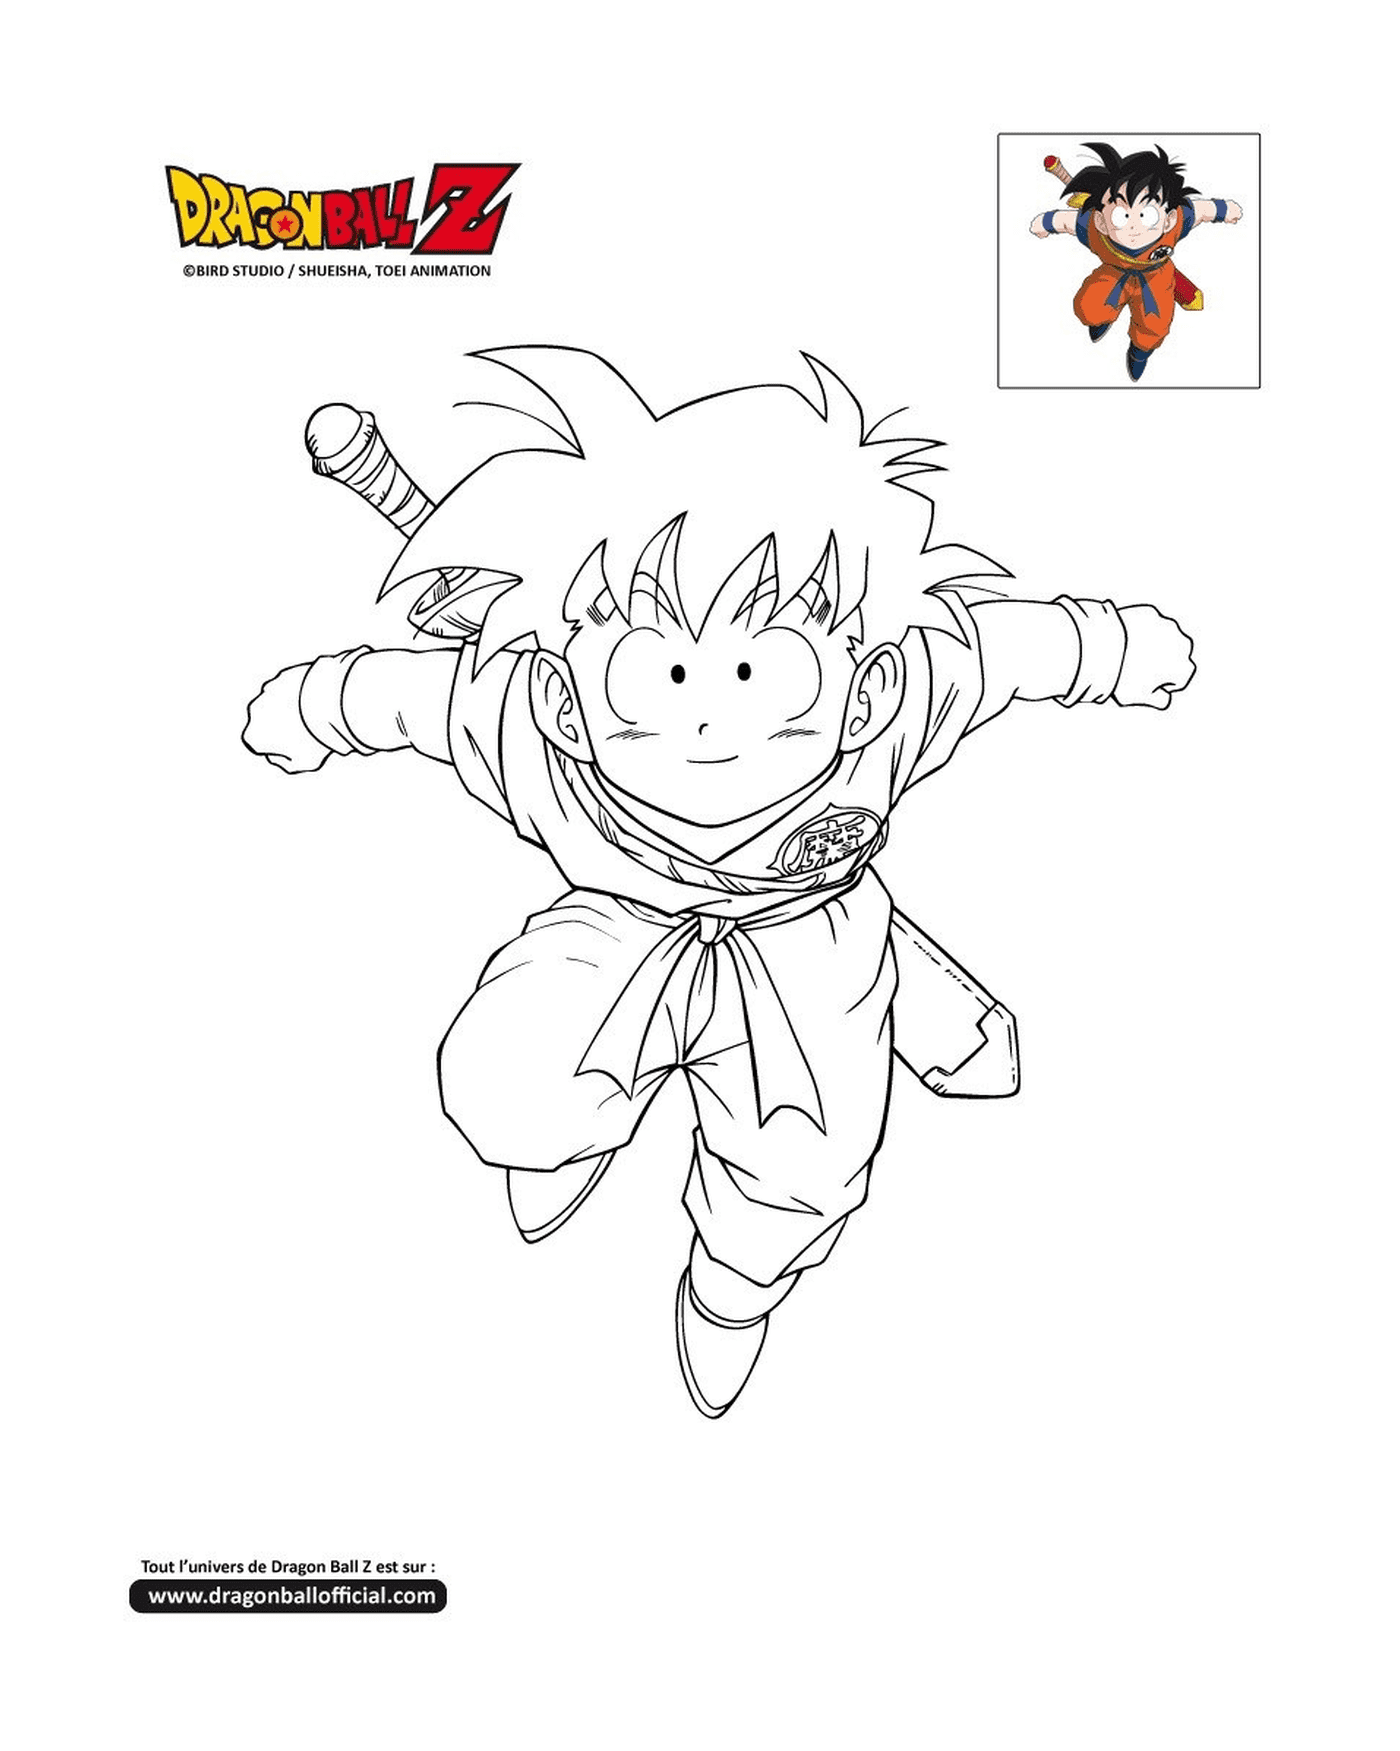  Gohan, a young boy holding a sword in Dragon Ball Z 